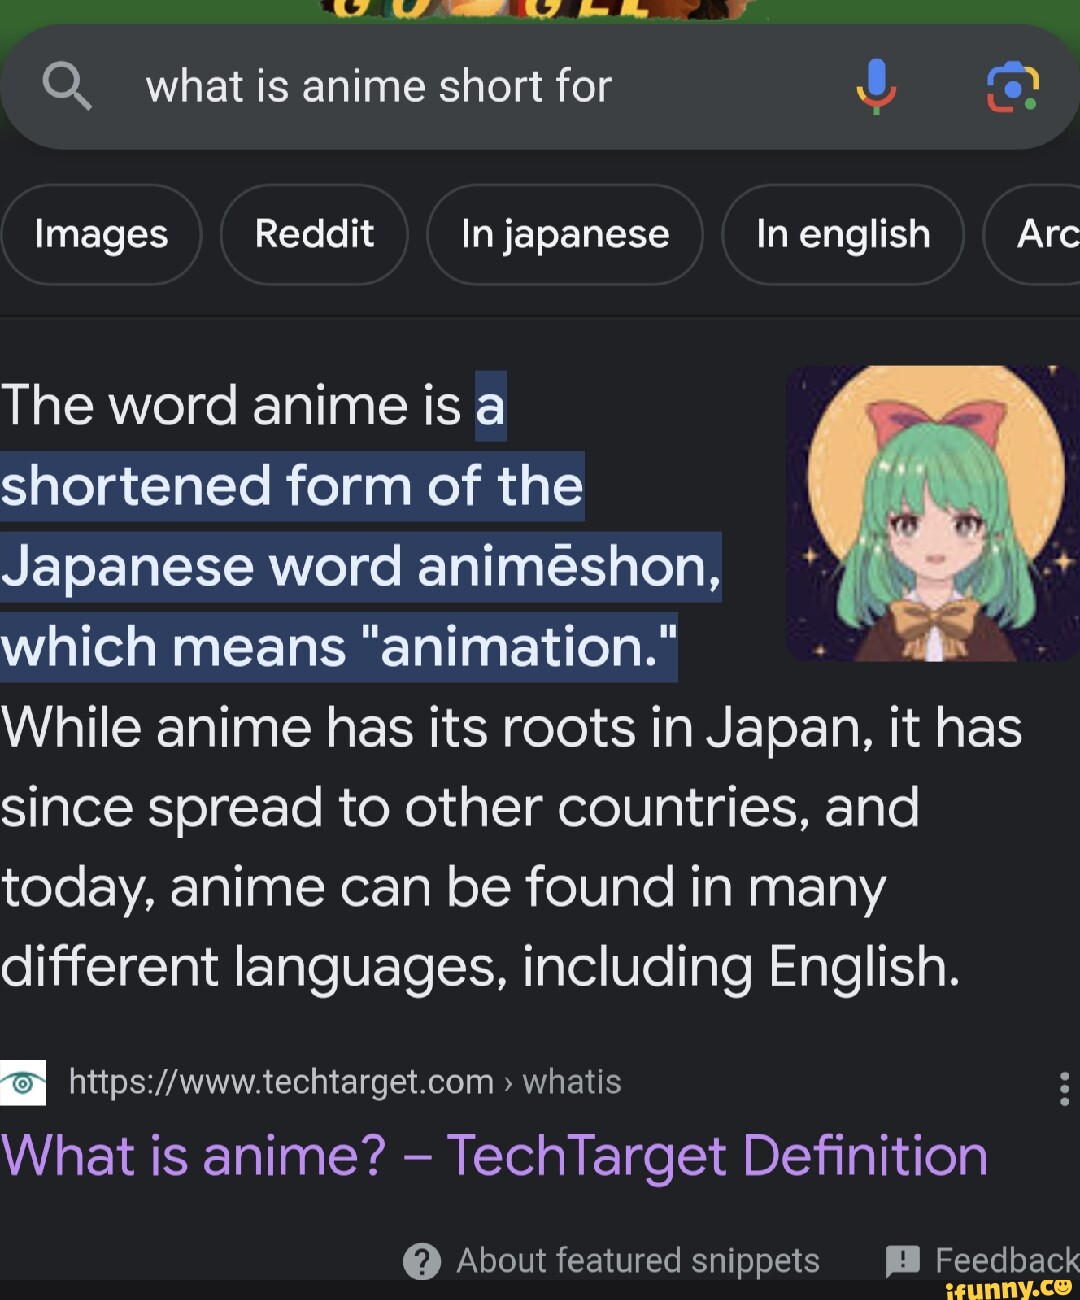 What is anime? – TechTarget Definition